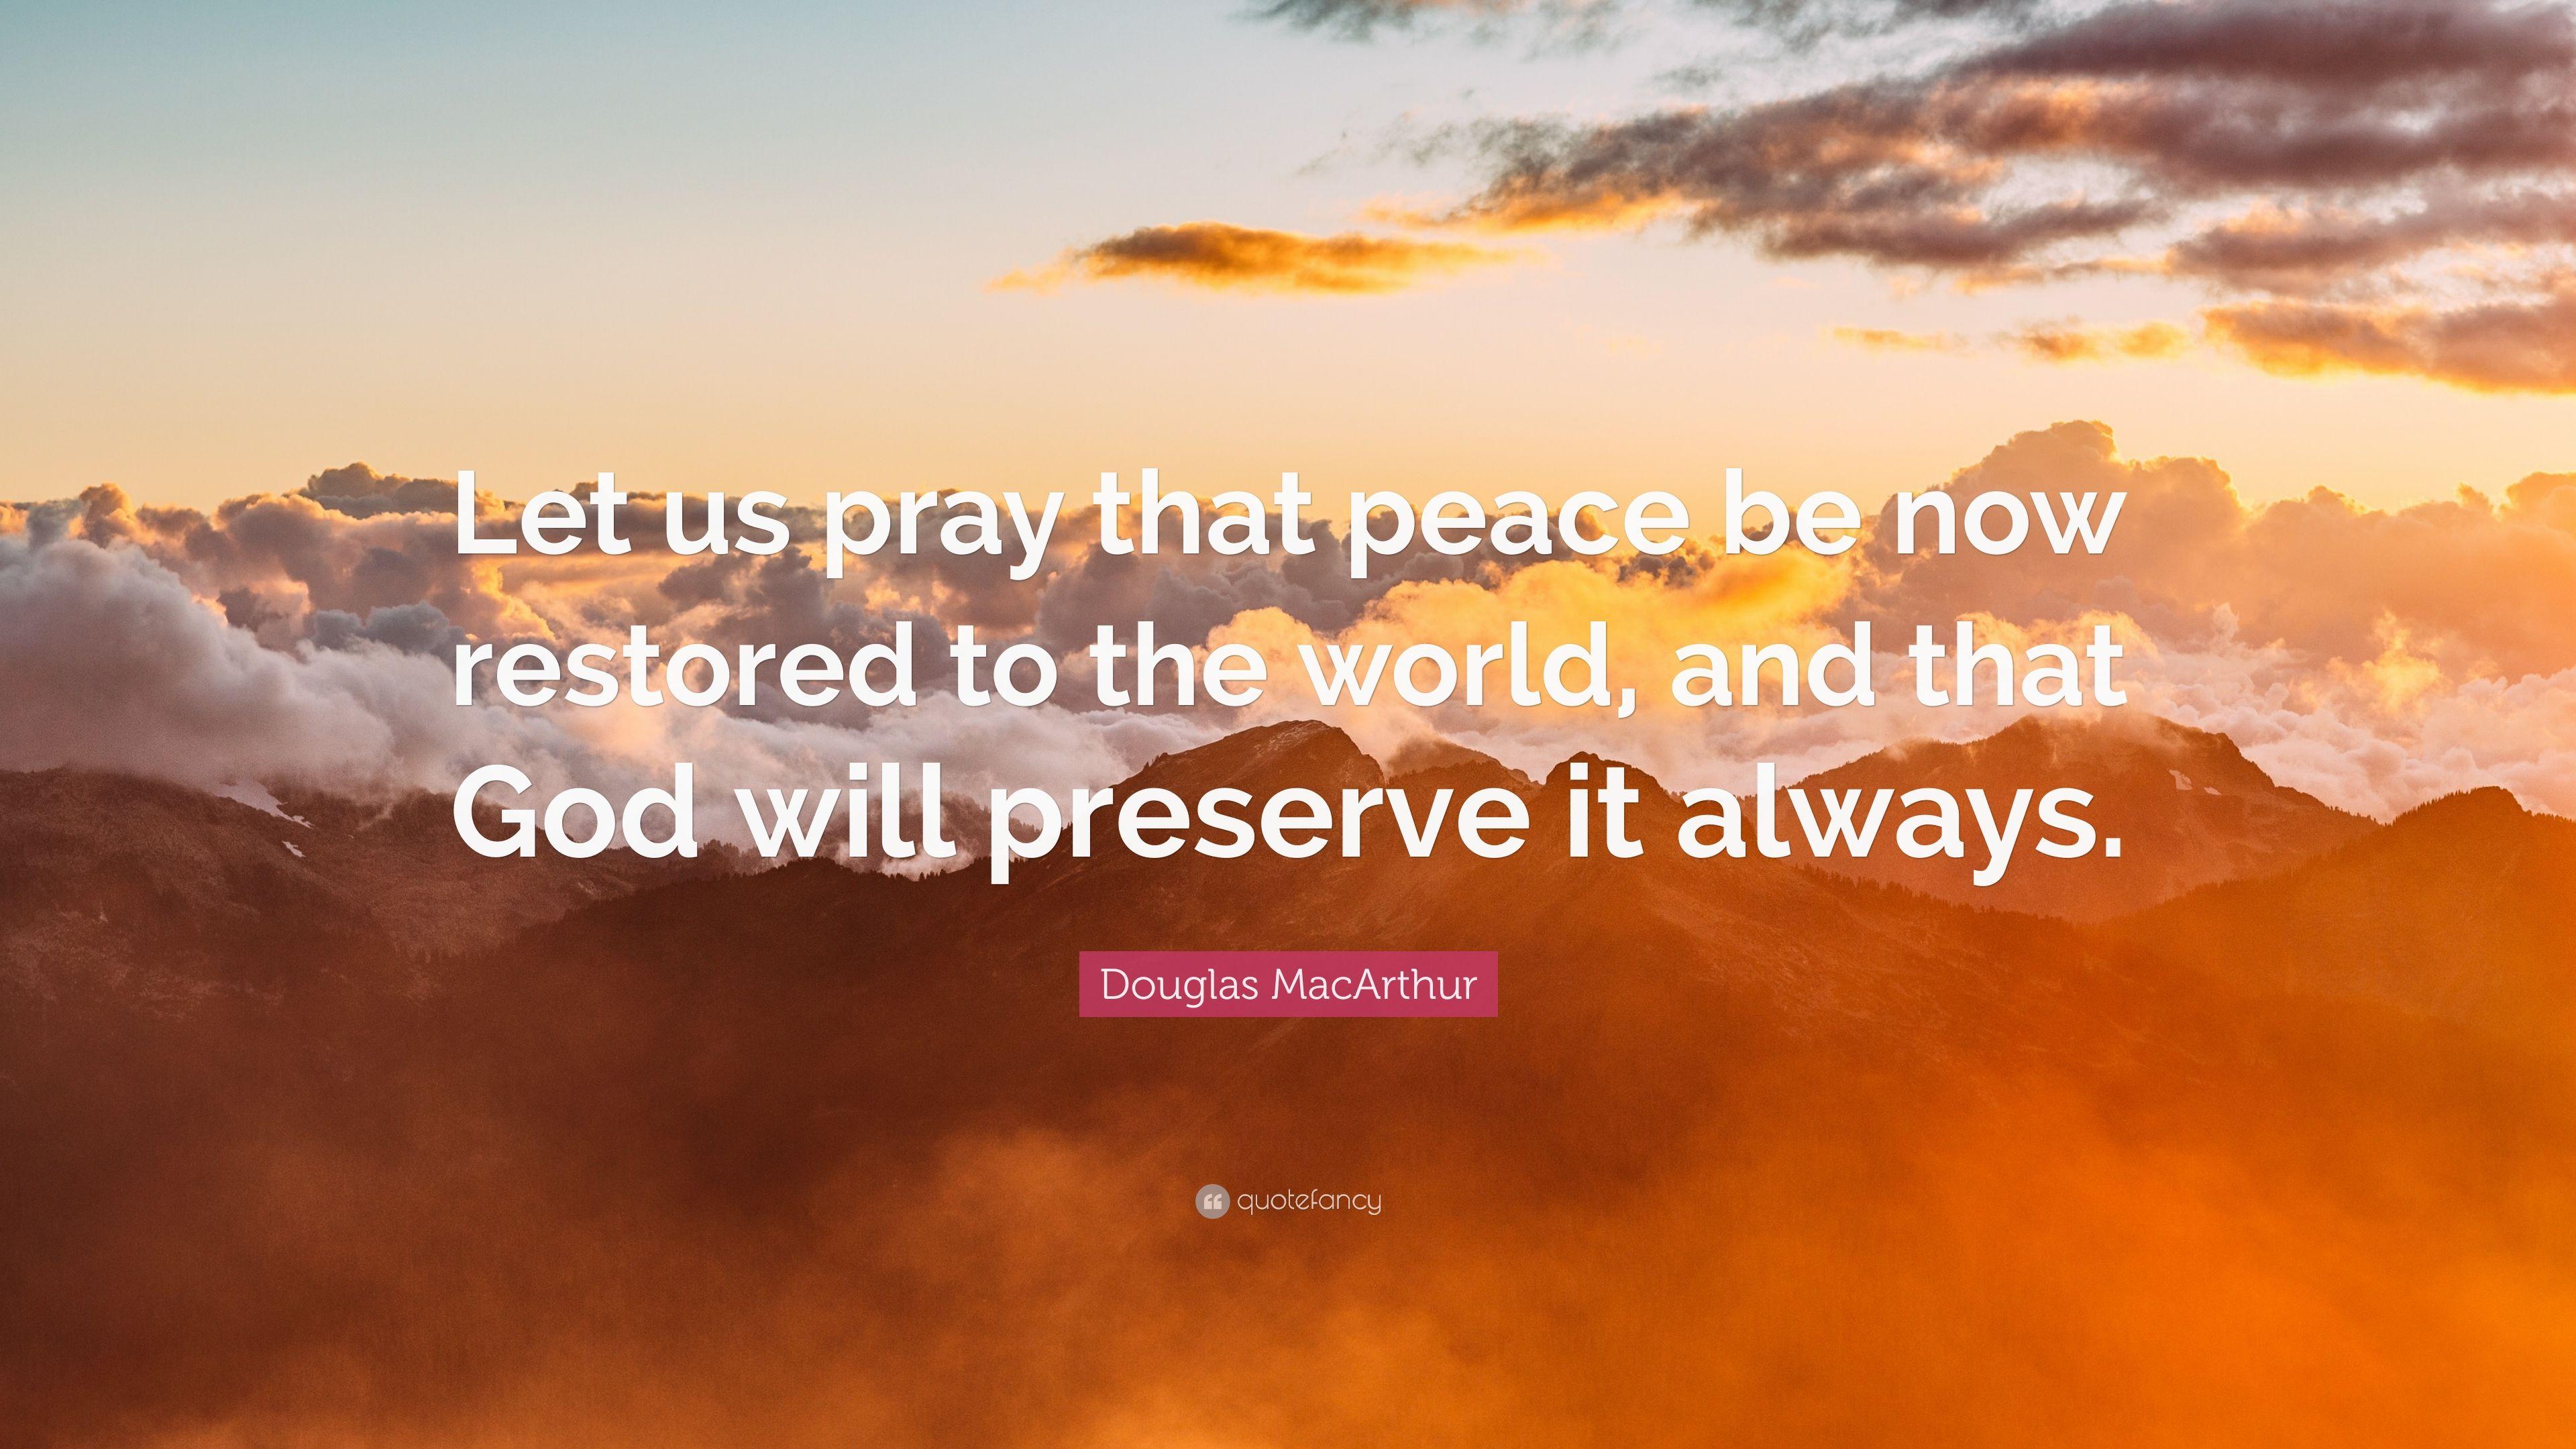 Douglas MacArthur Quote: “Let us pray that peace be now restored